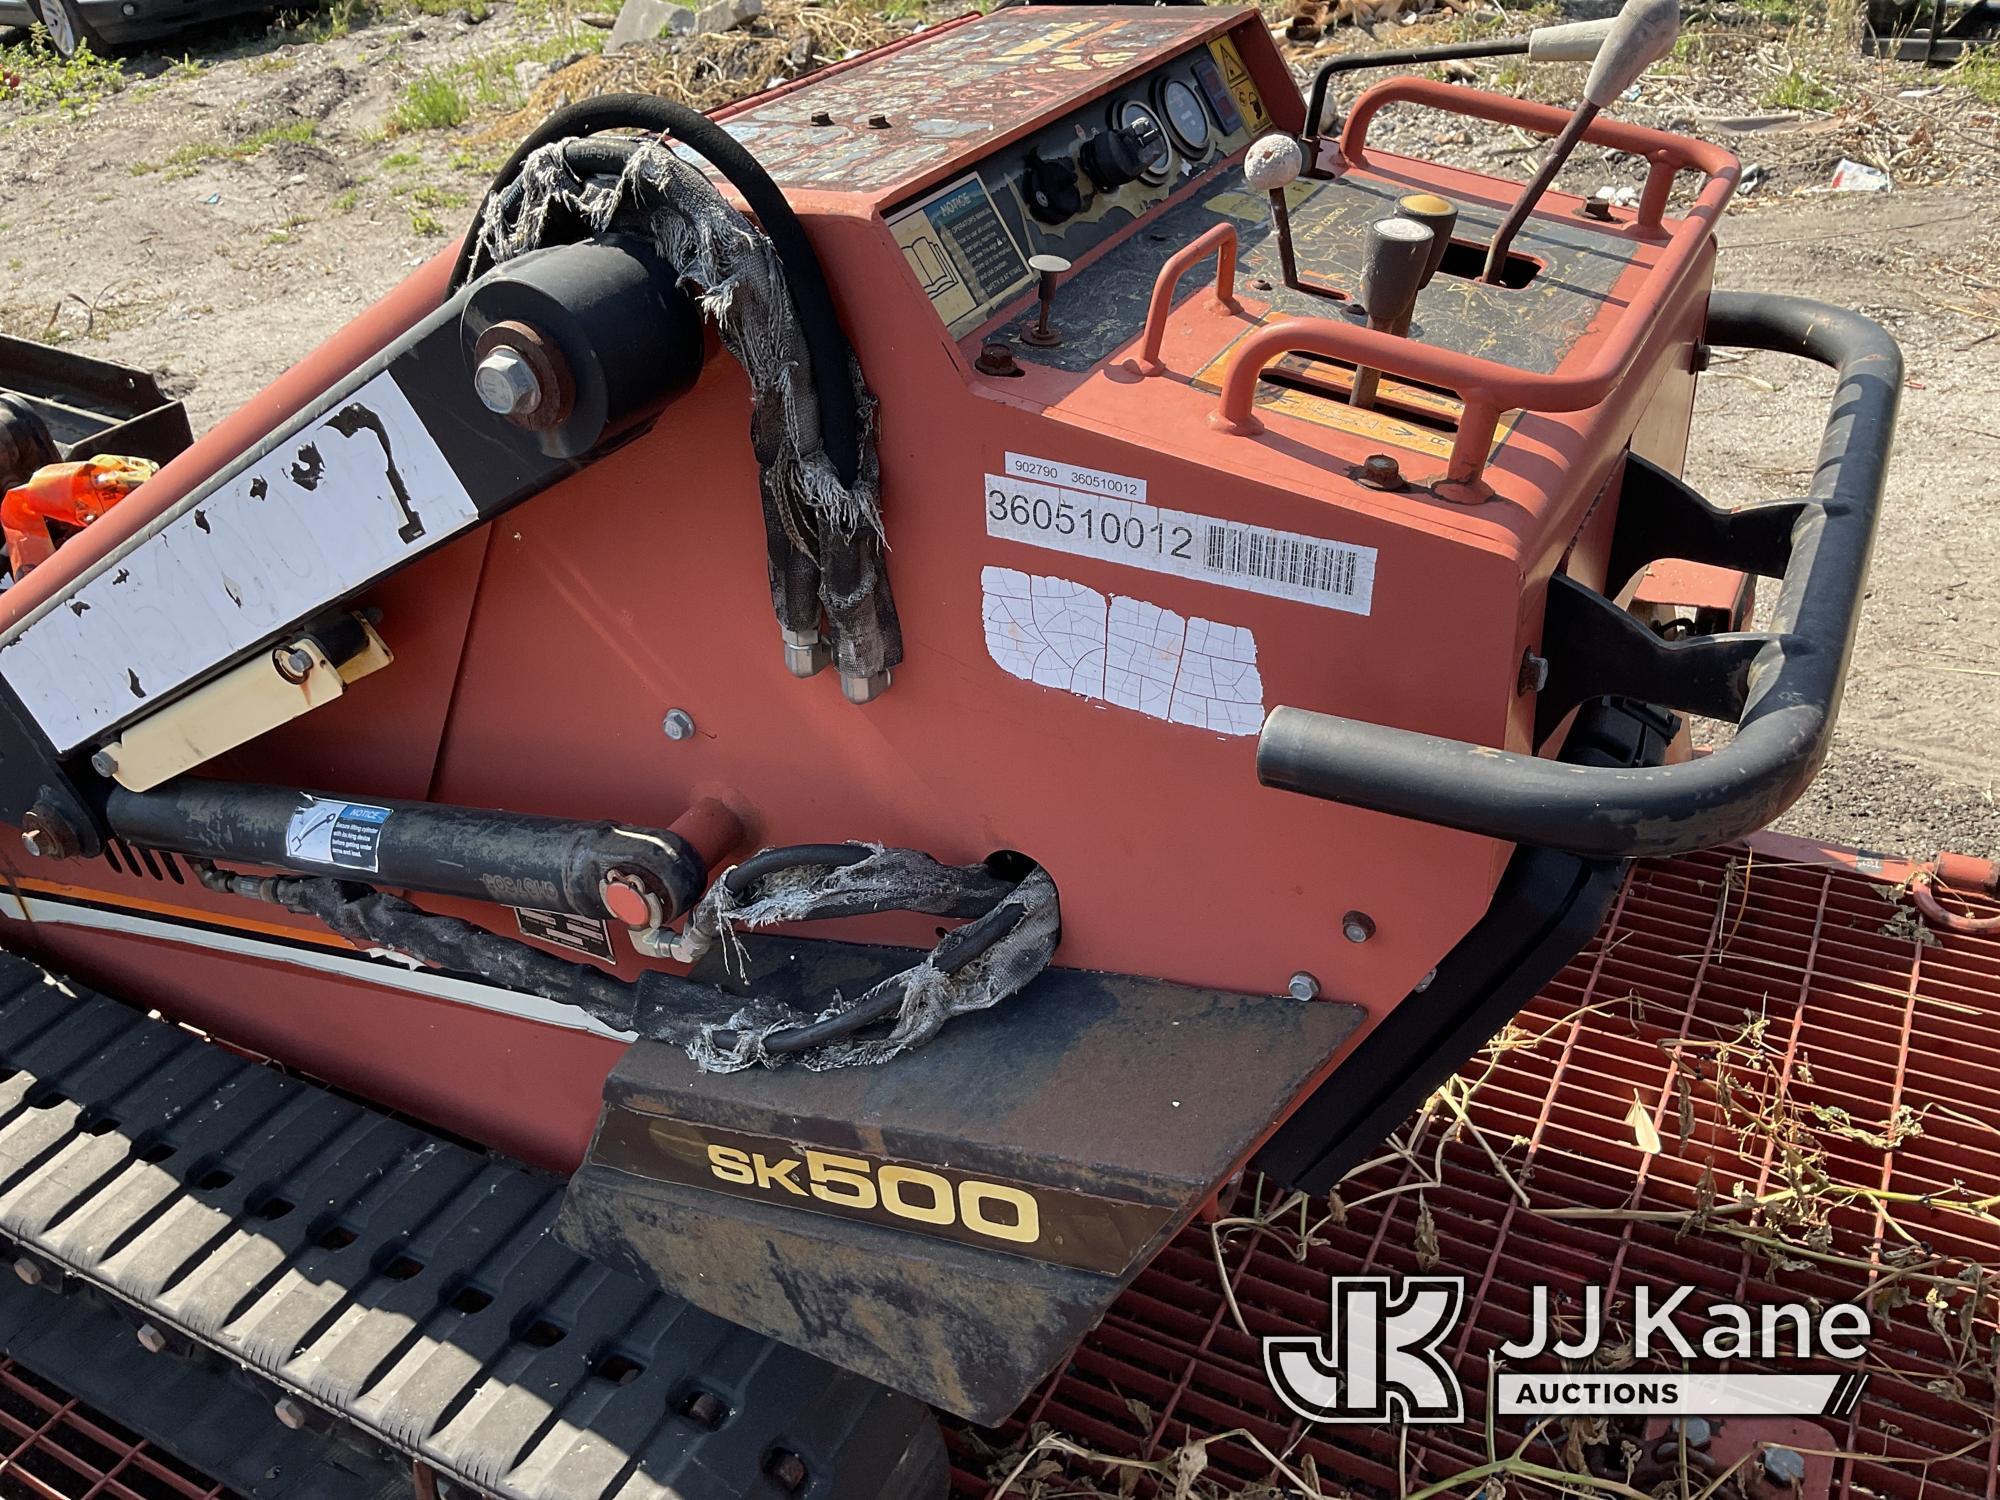 (Tampa, FL) 2005 Ditch Witch SK500 Walk-Behind Crawler Trencher Not Running, Condition Unknown